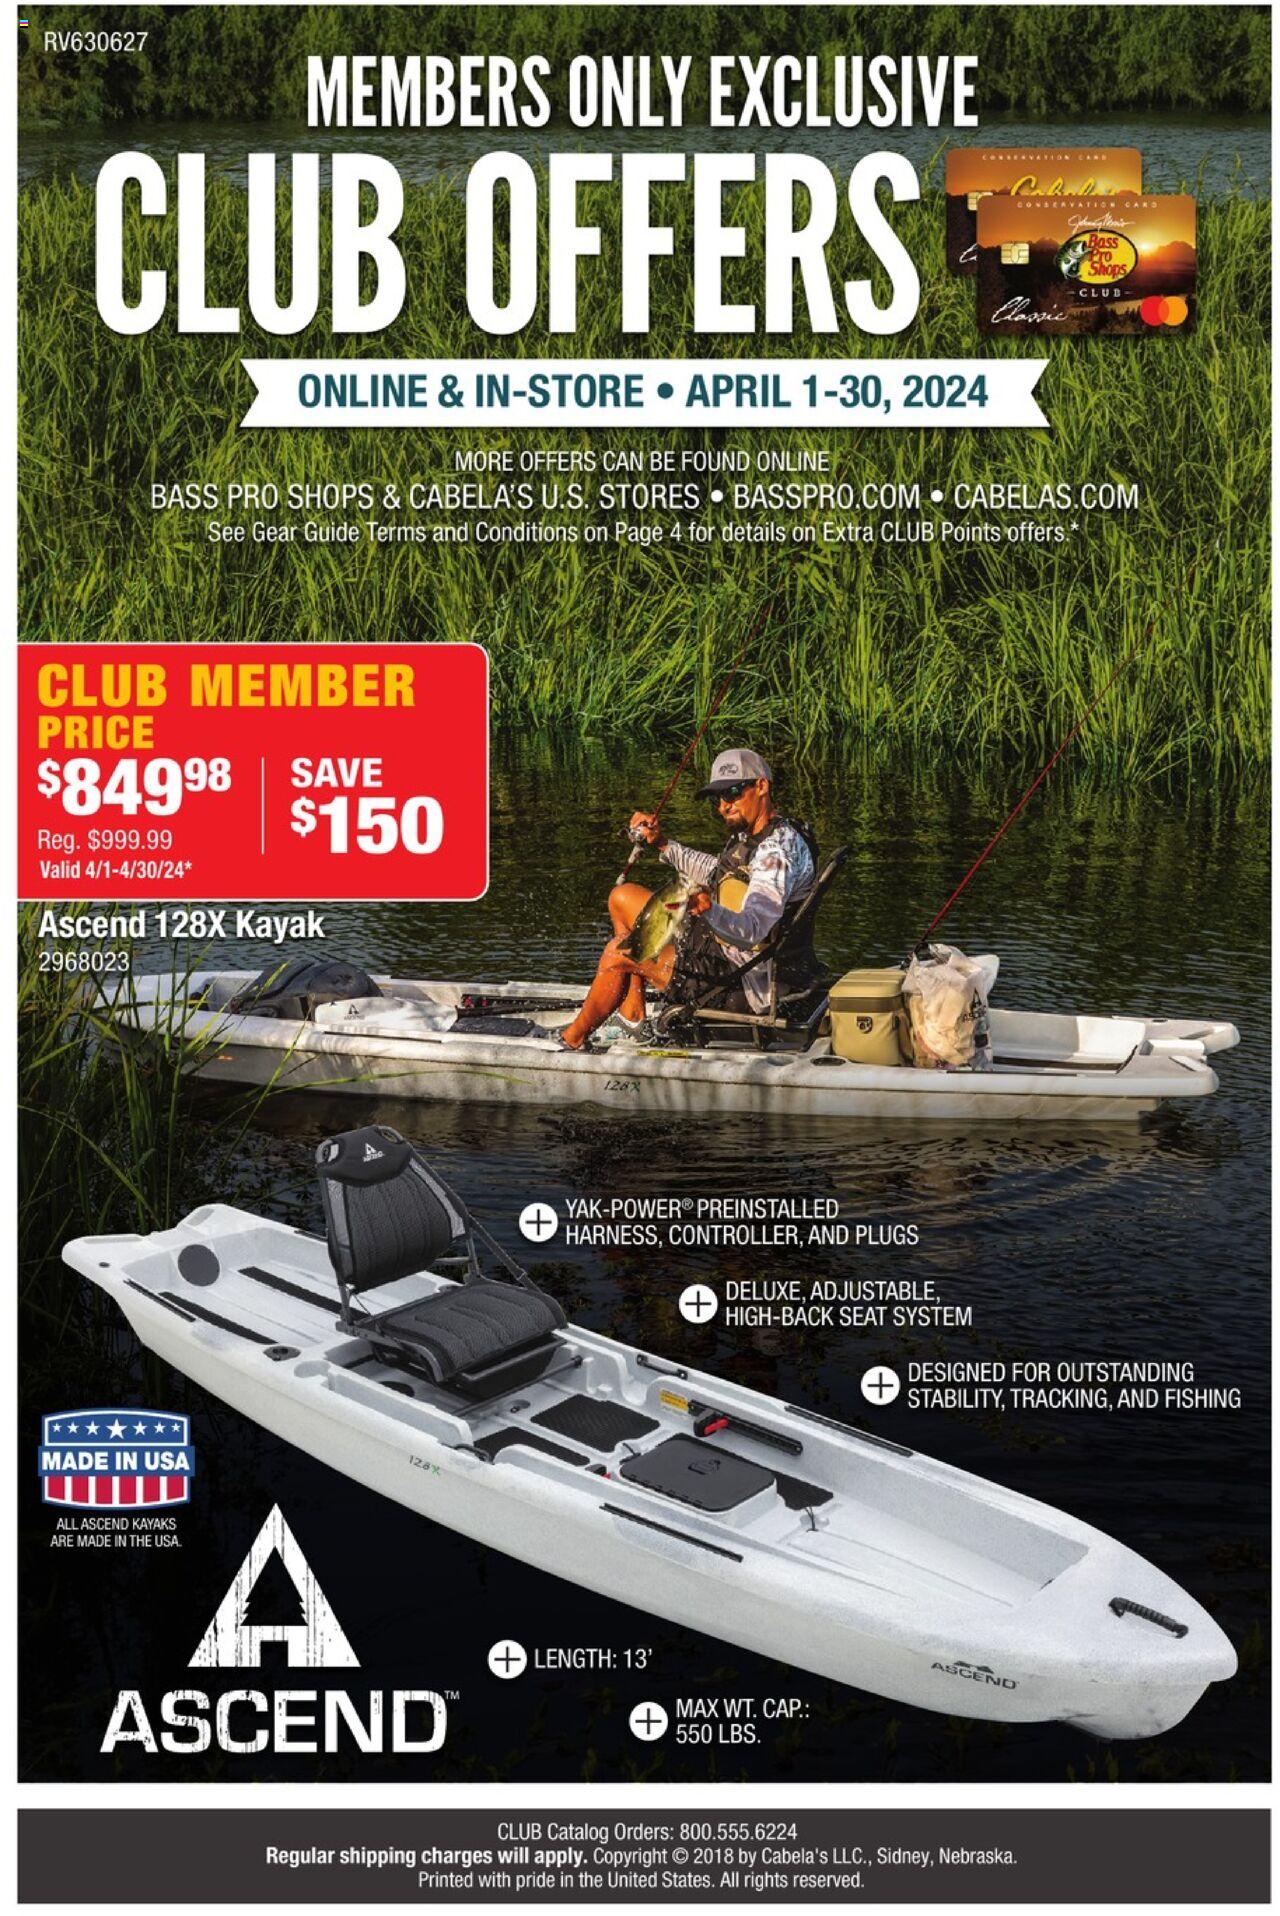 Bass Pro Shops - Members Only Exclusive Club Offers - Page 1